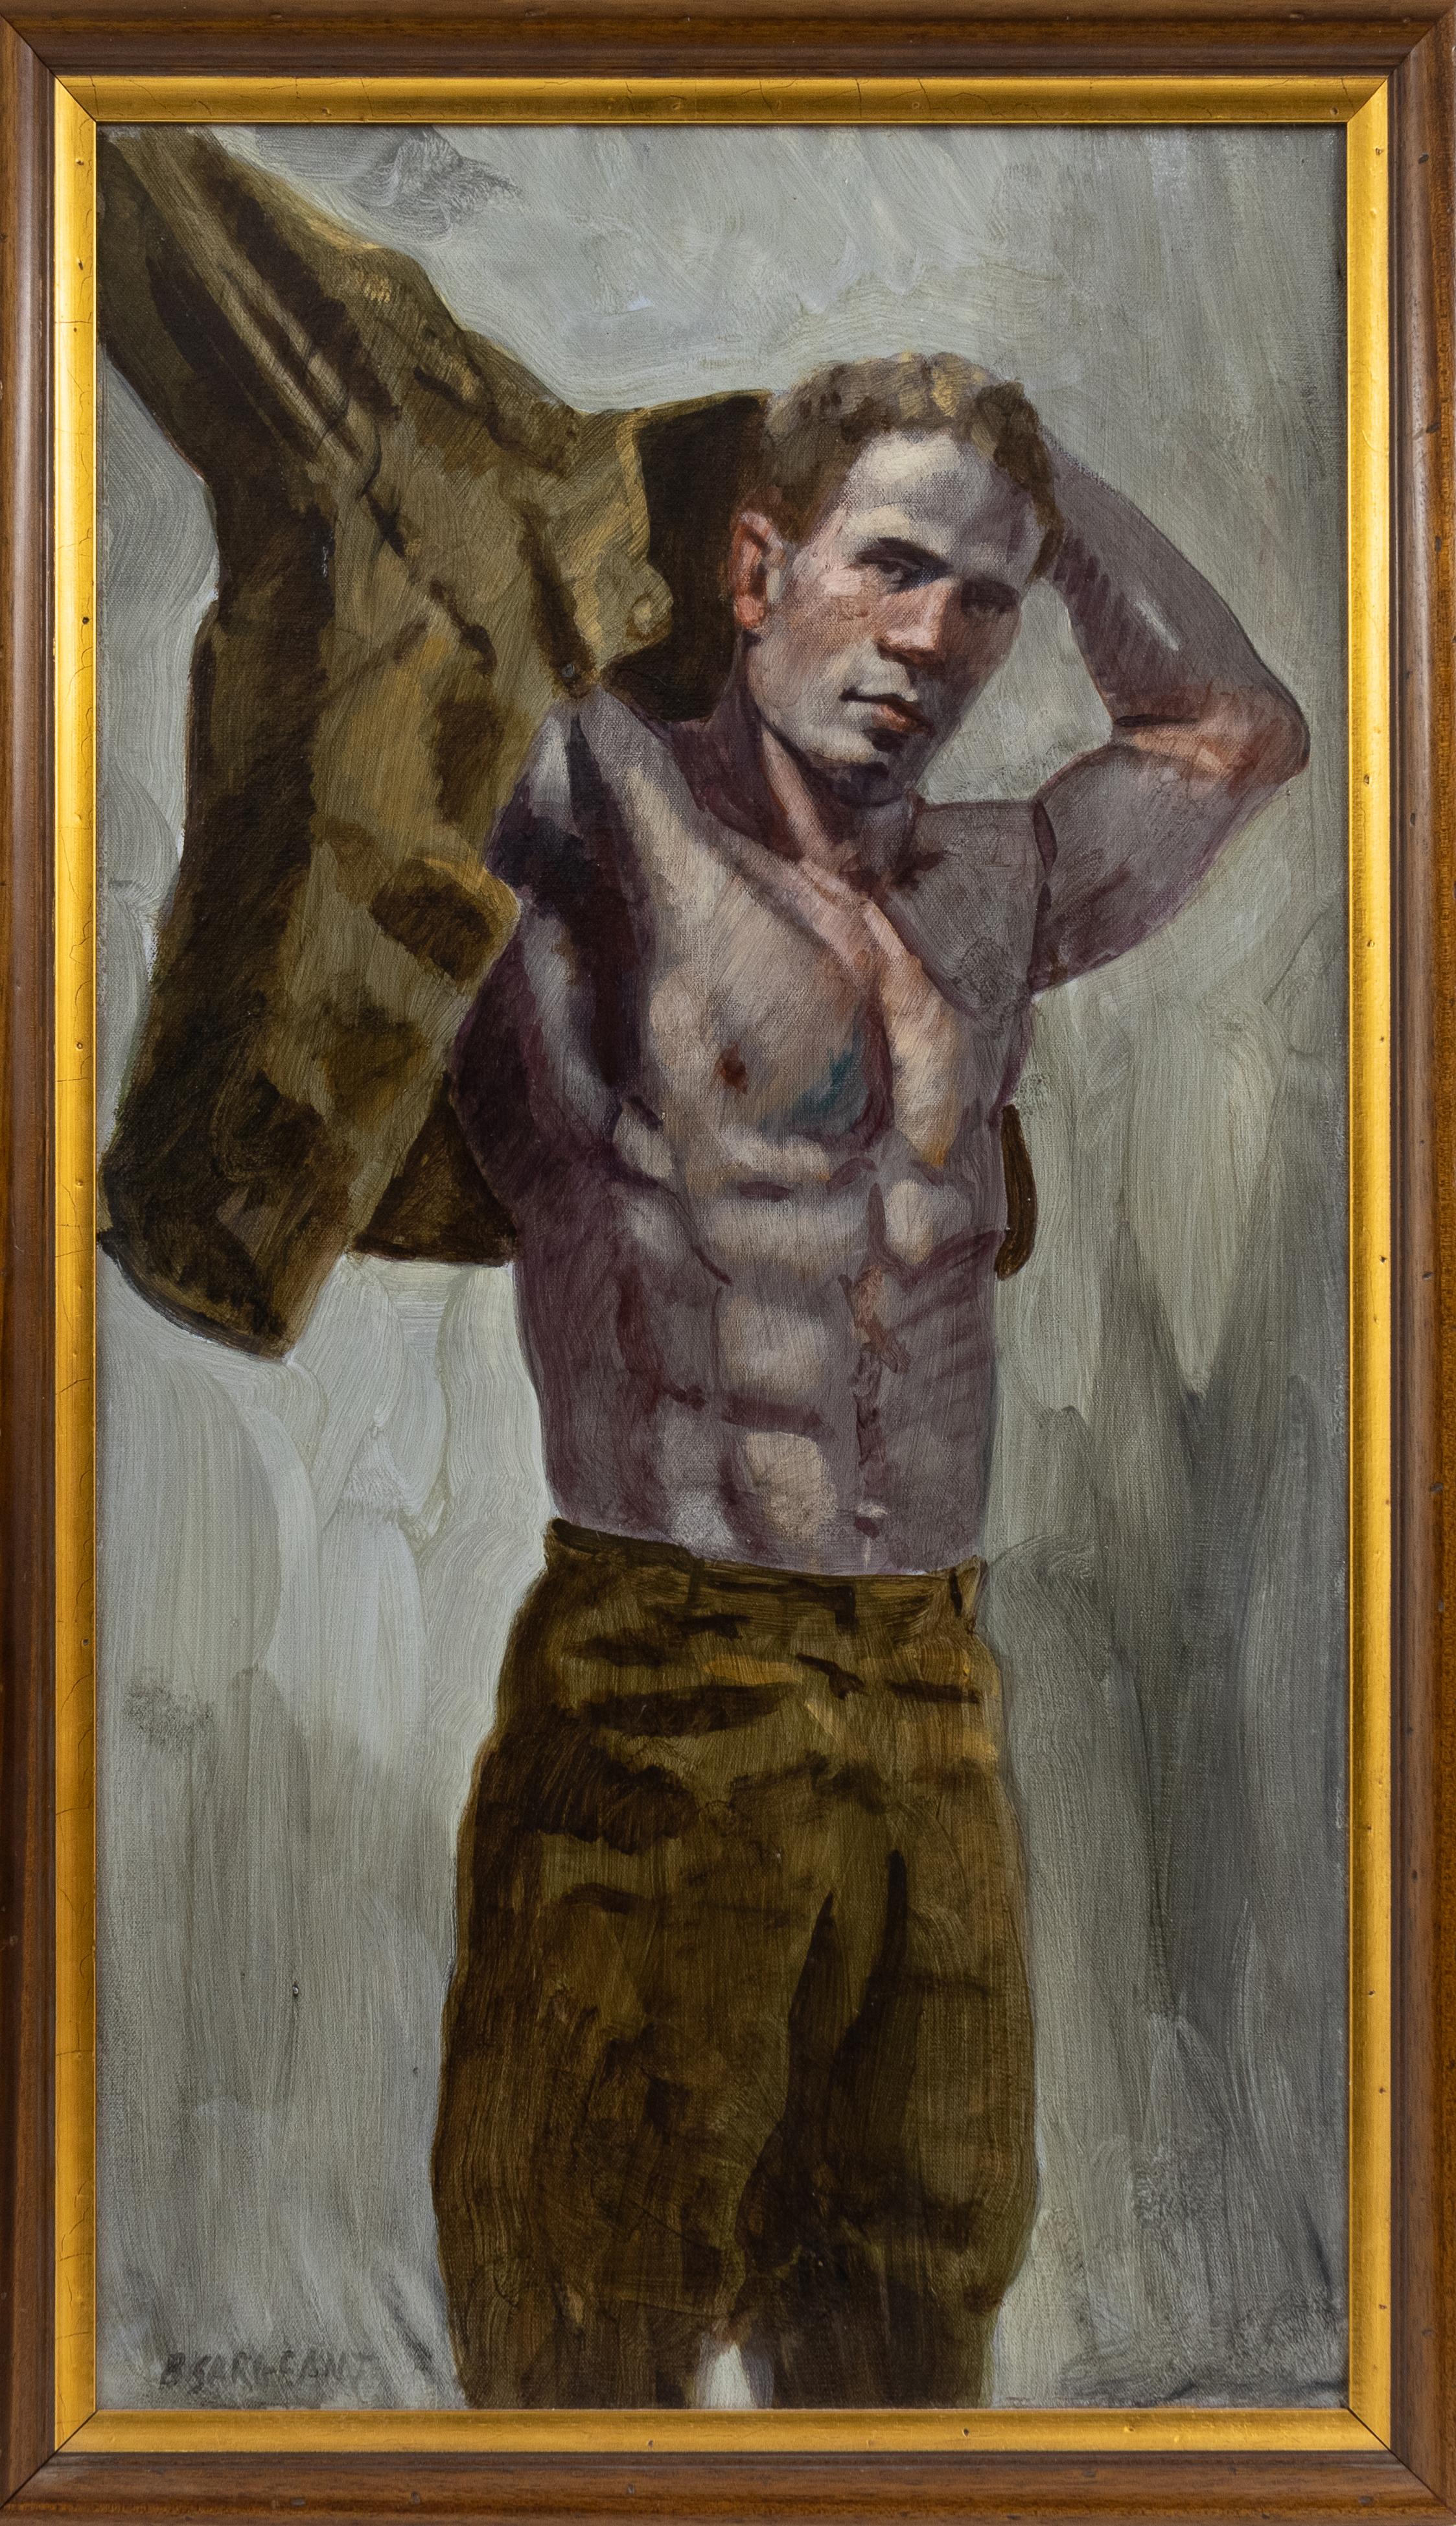 [Bruce Sargeant (1898-1938)] Soldier Getting Dressed - Painting by Mark Beard